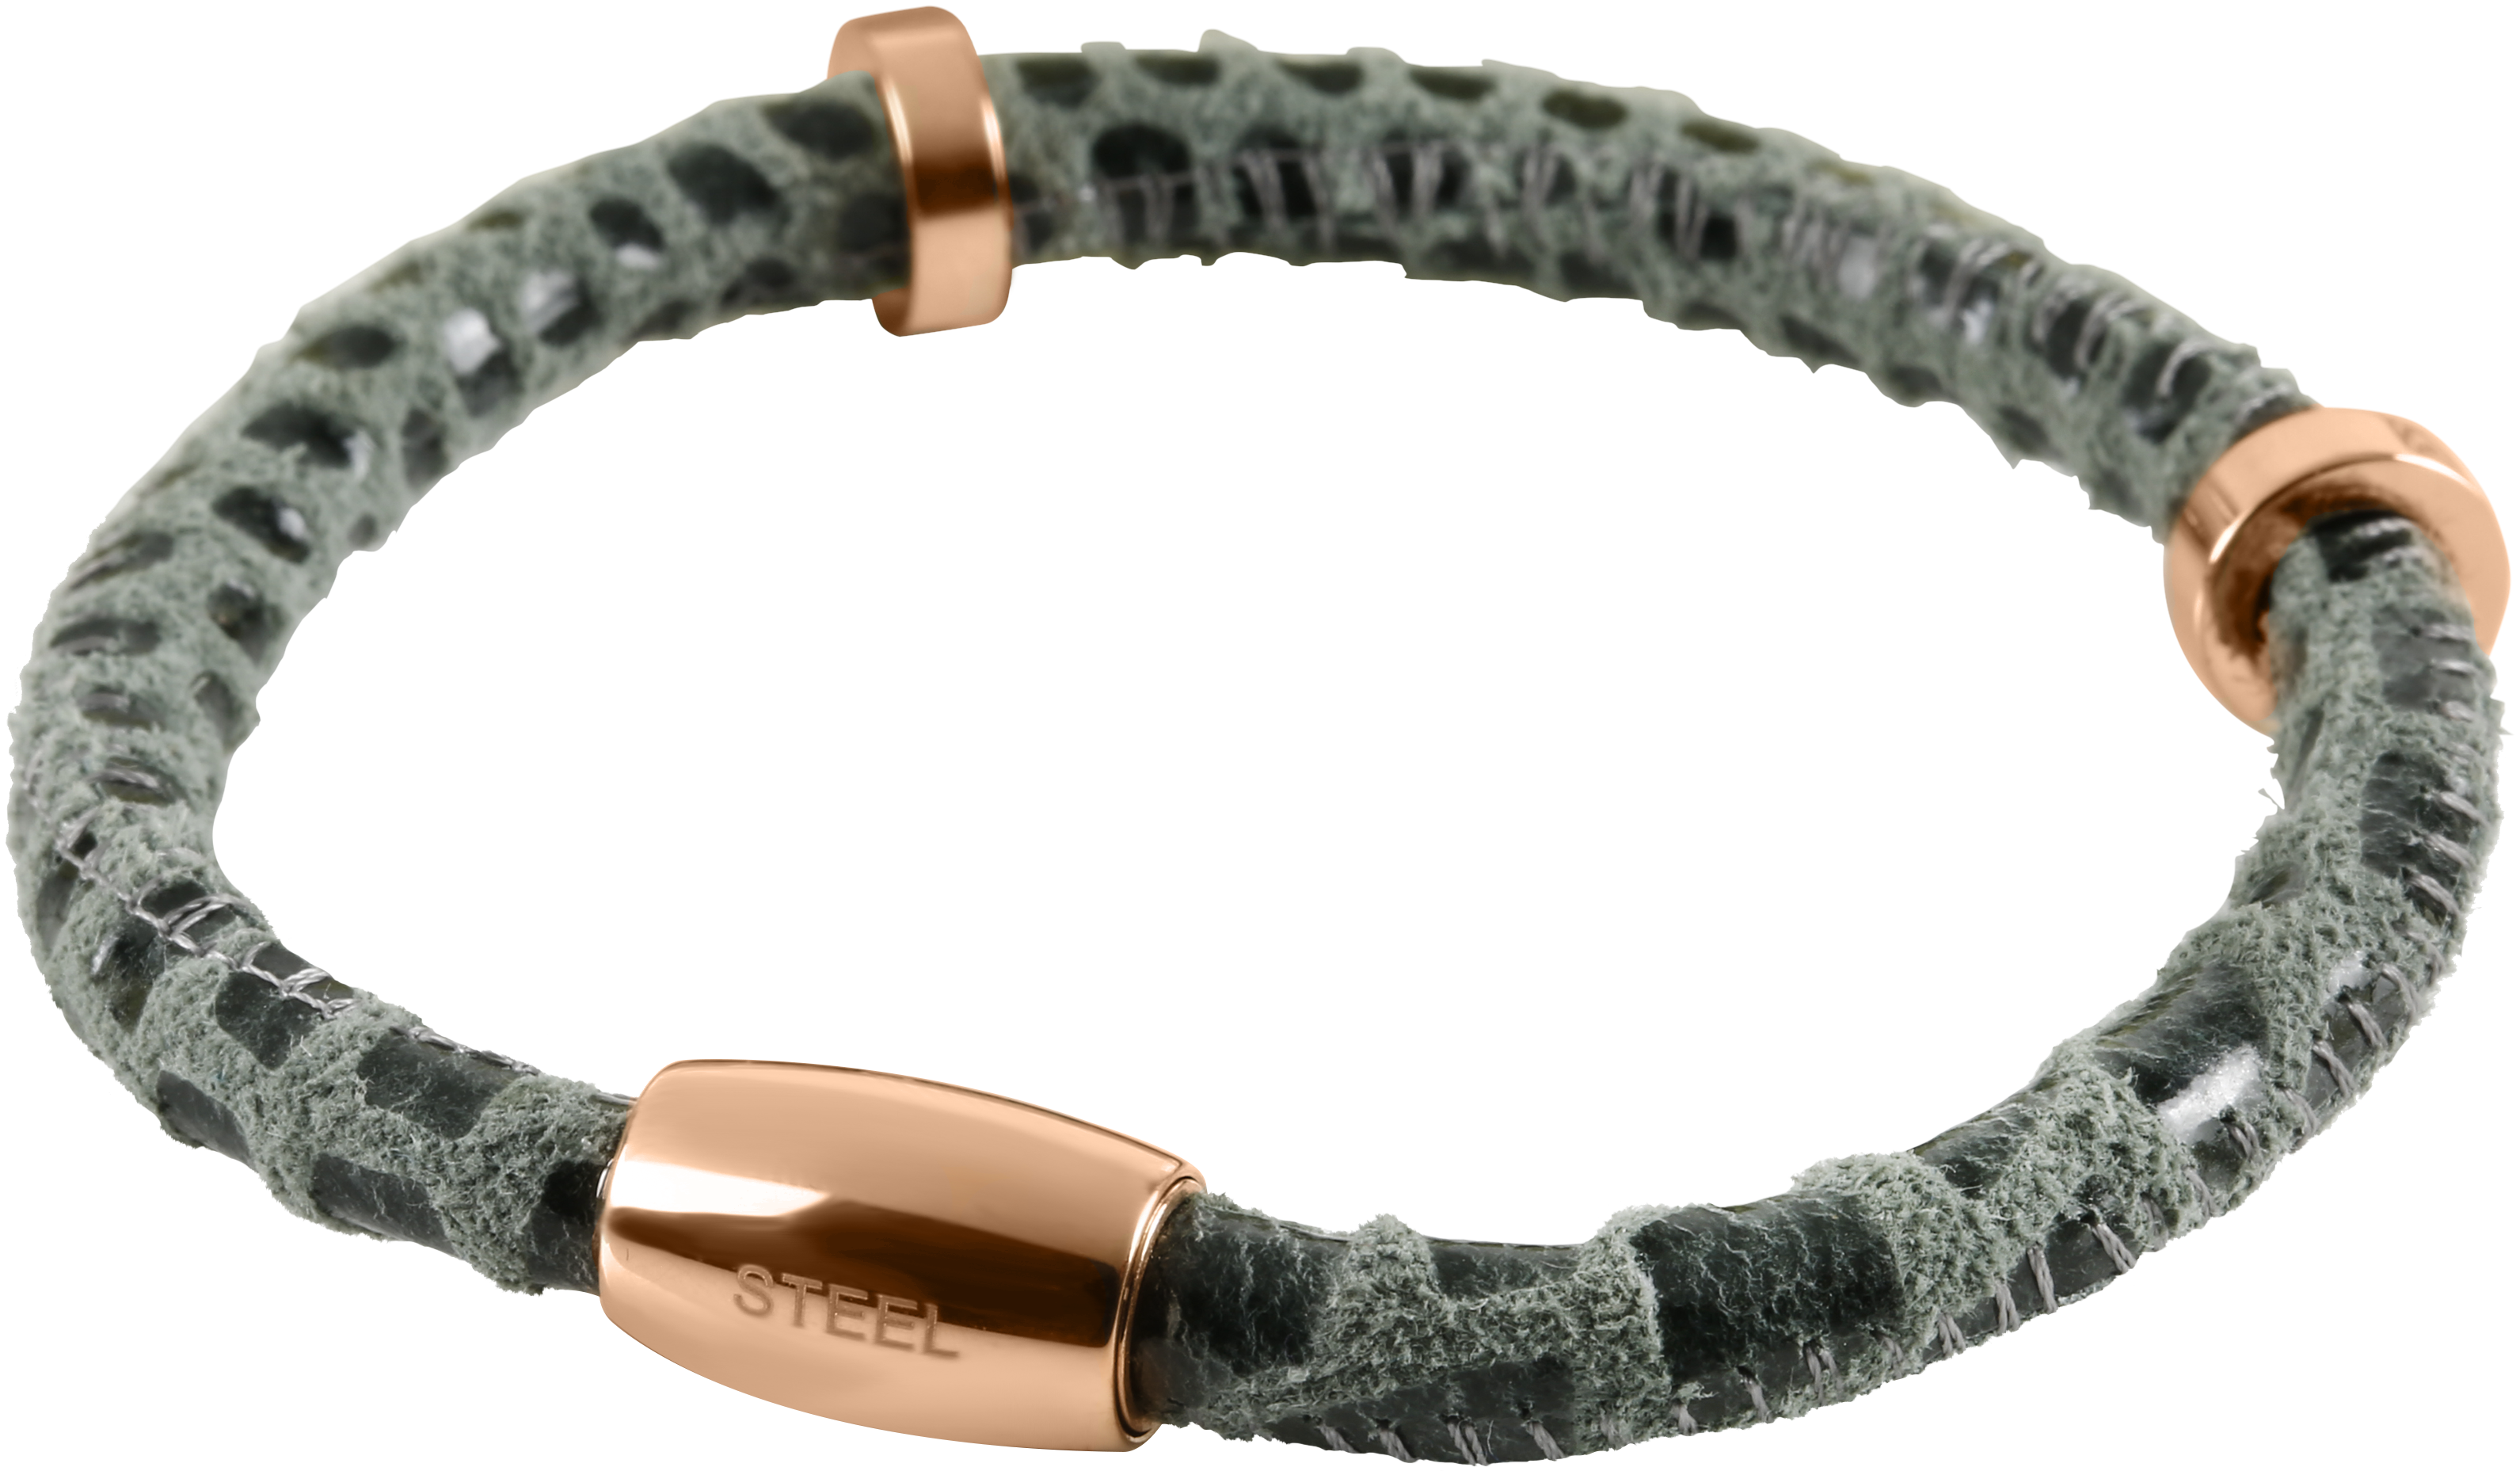 Grey Textured Leather Men's Bracelet with a Magnetic Rose Gold Plated Steel Clasp and Spacers